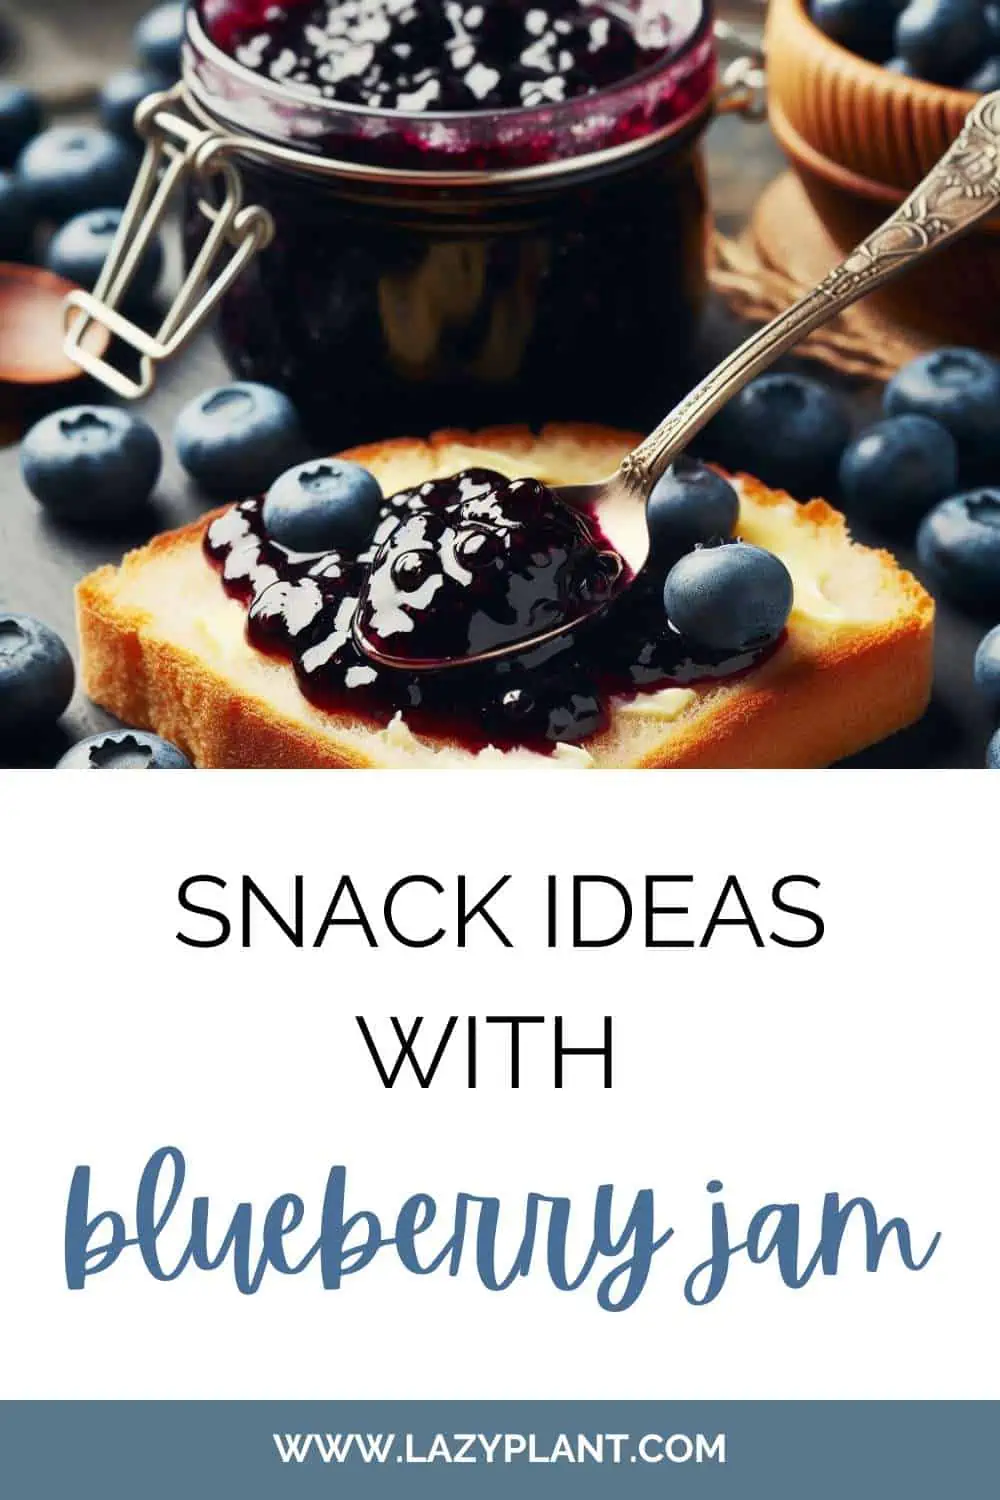 Low-carb blueberry jams are good for weight loss.